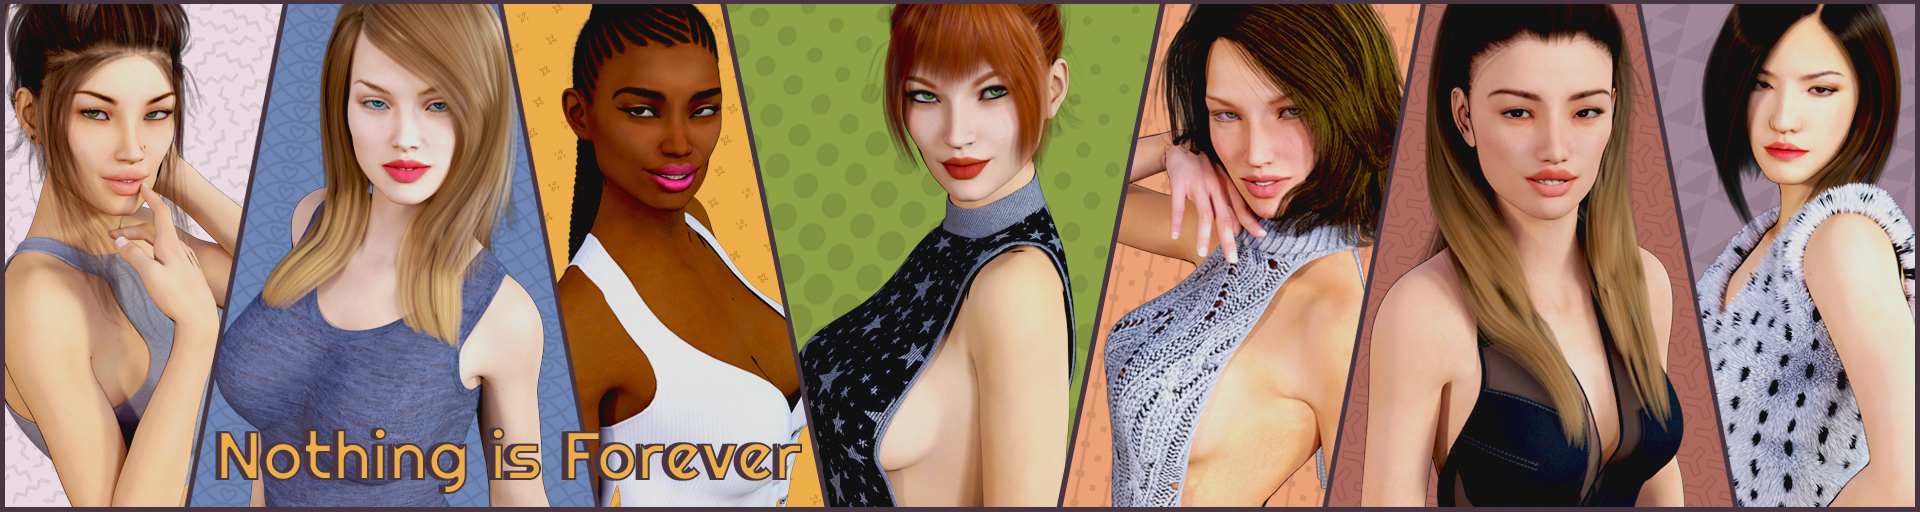 Nothing Is Forever [MrSilverLust] Adult xxx Game Download